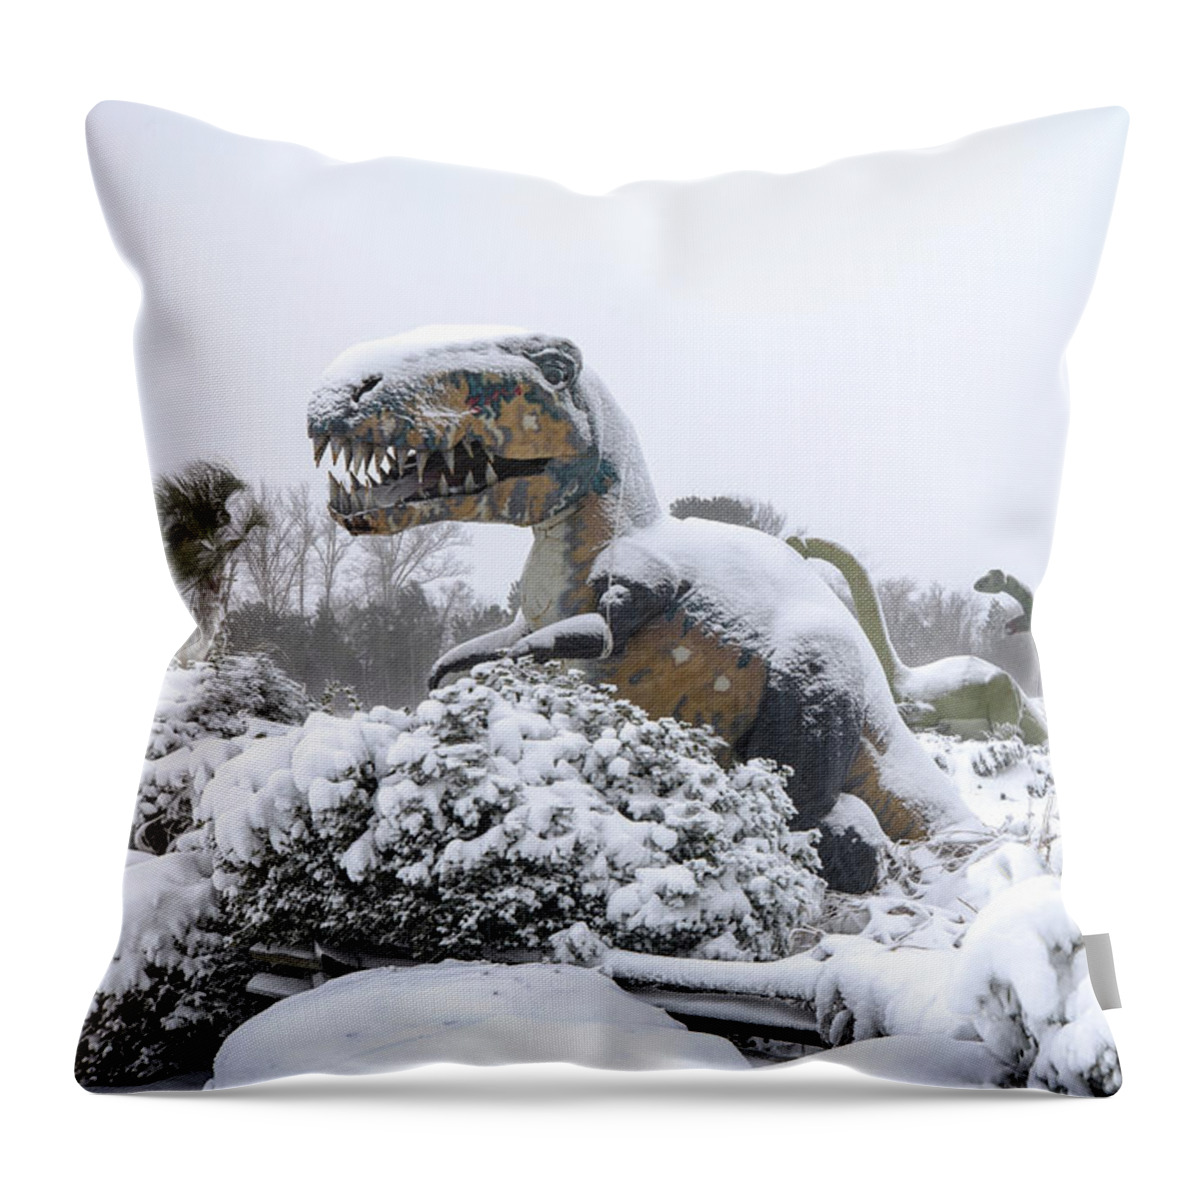 Photosbymch Throw Pillow featuring the photograph Demise of the dinosaurs by M C Hood